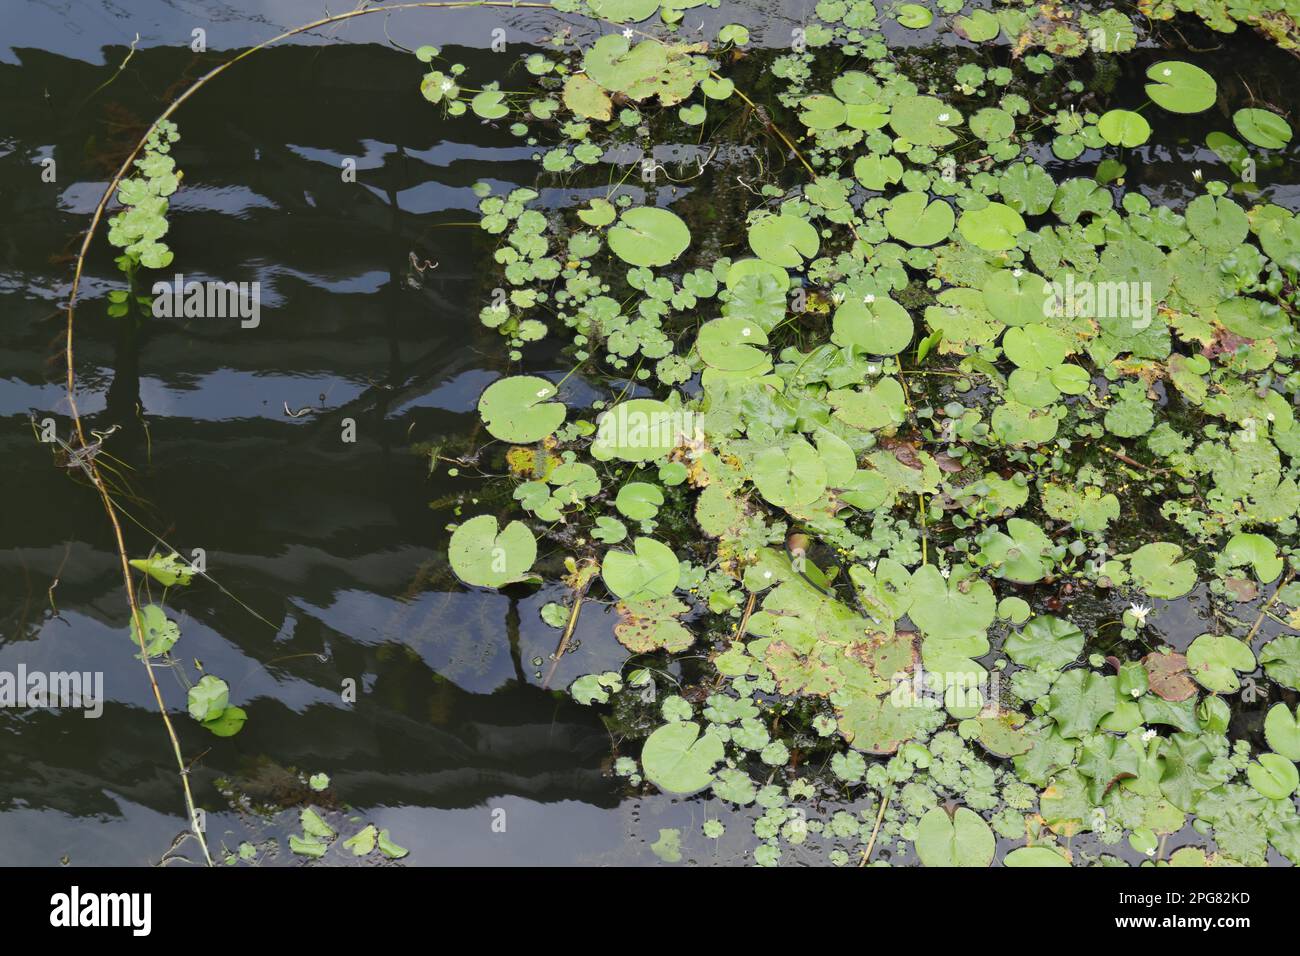 Lots of water lily plants with common aquatic weed plants growing together as a cluster on the surface of a river in the Sri Lanka Stock Photo